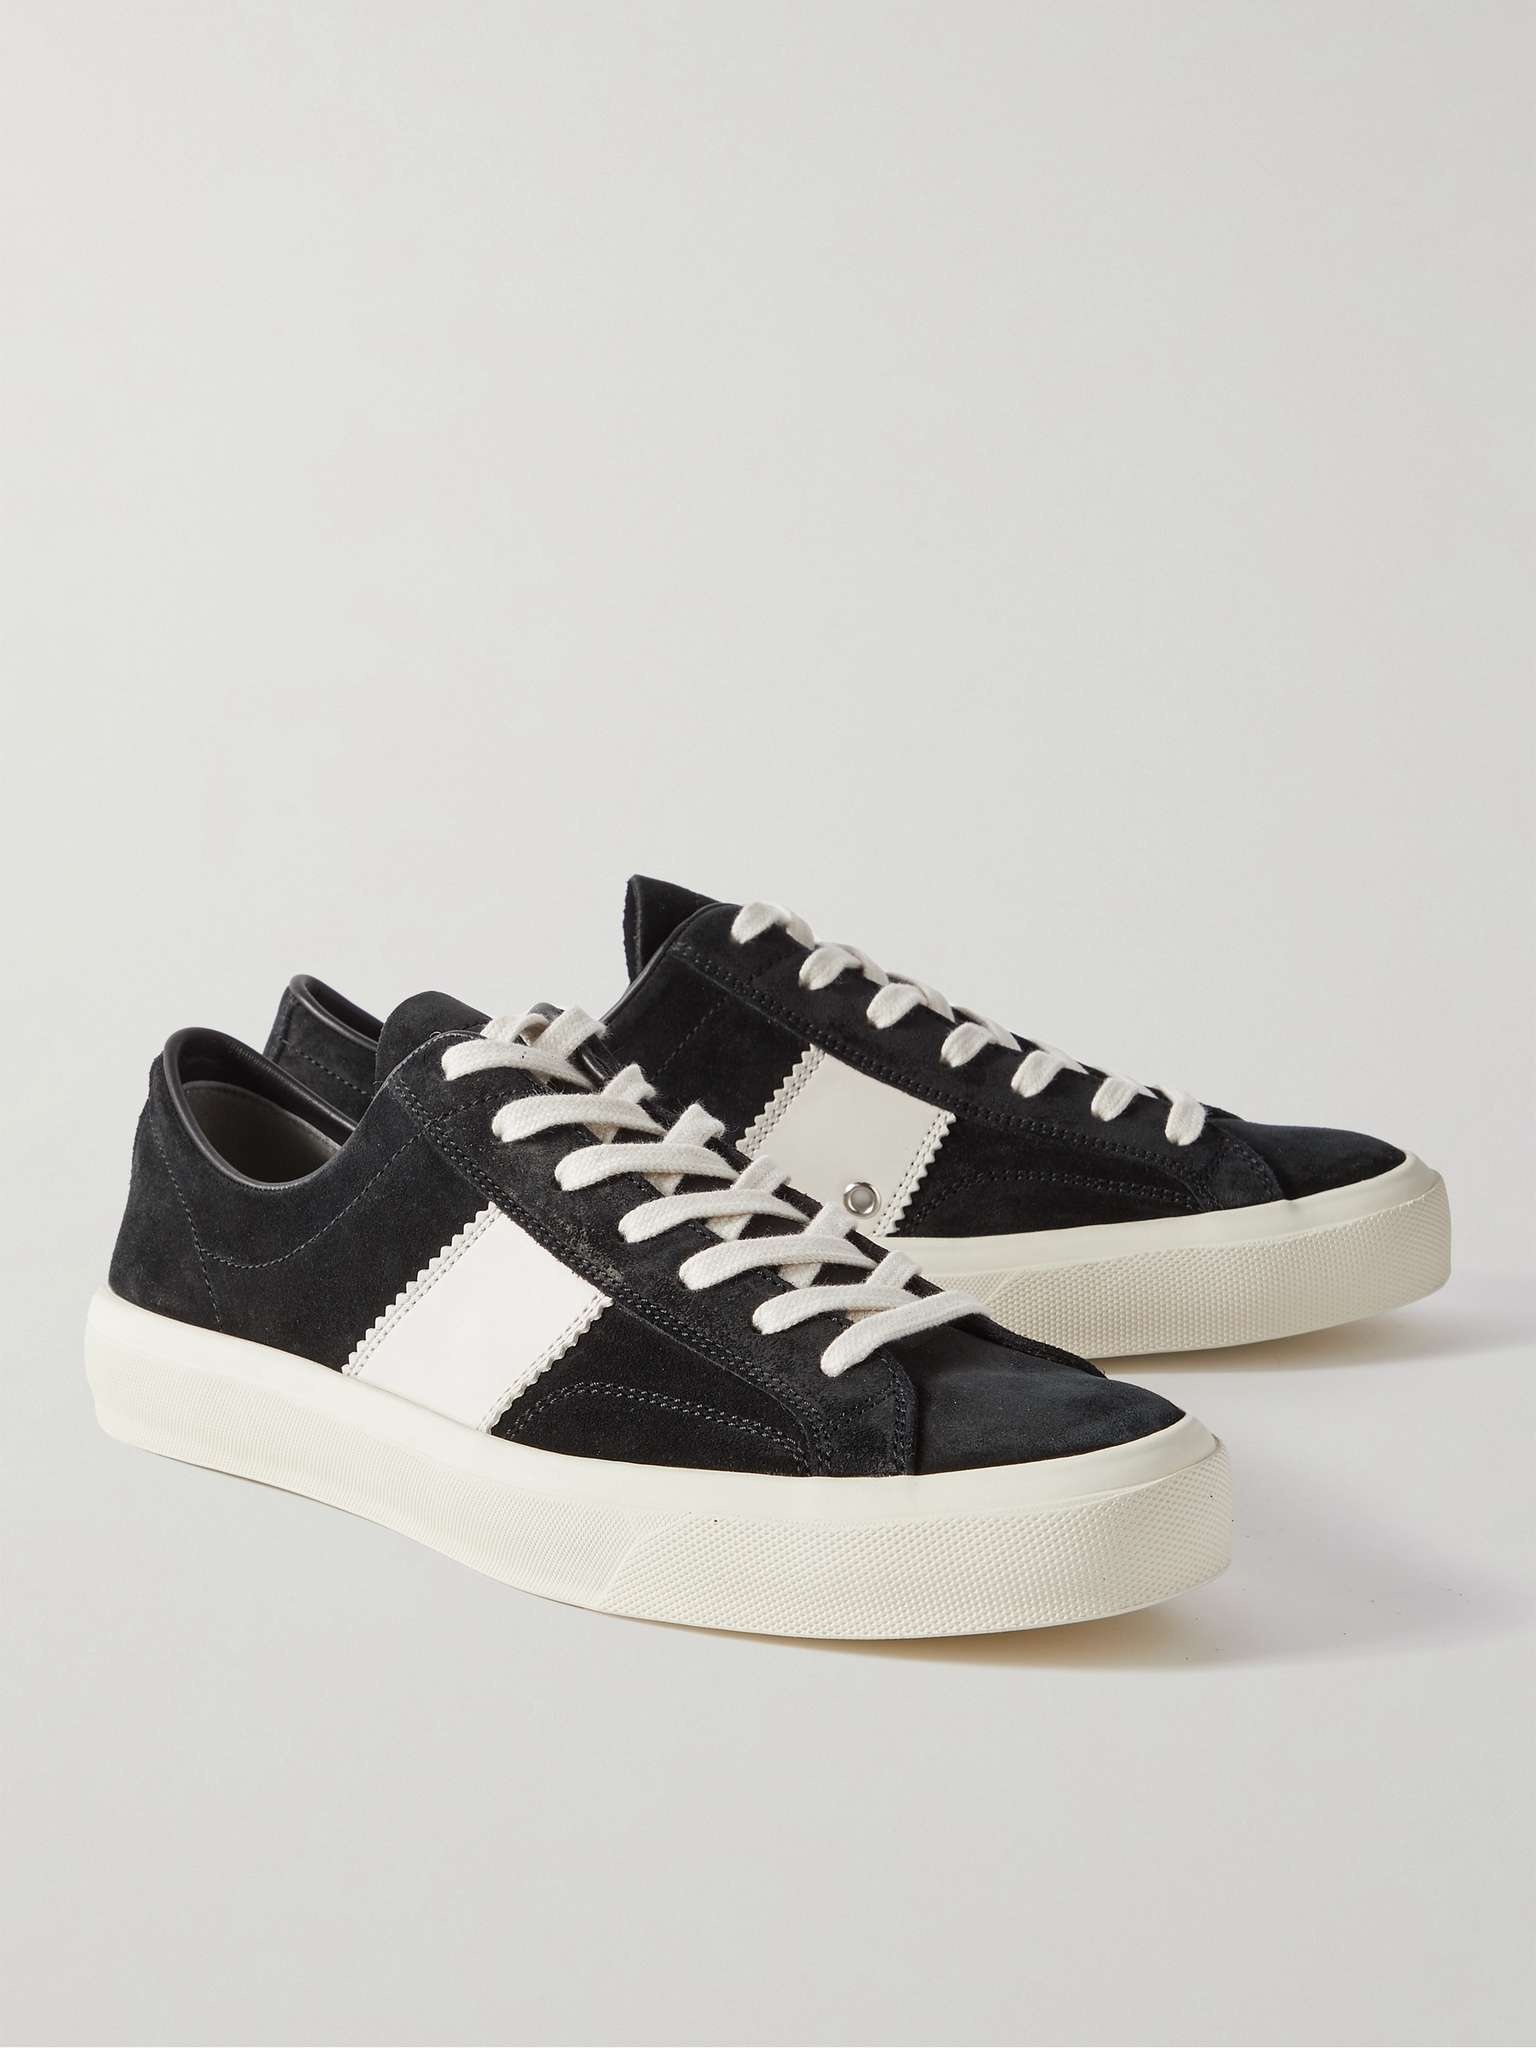 Cambridge Leather-Trimmed Suede Sneakers - 4